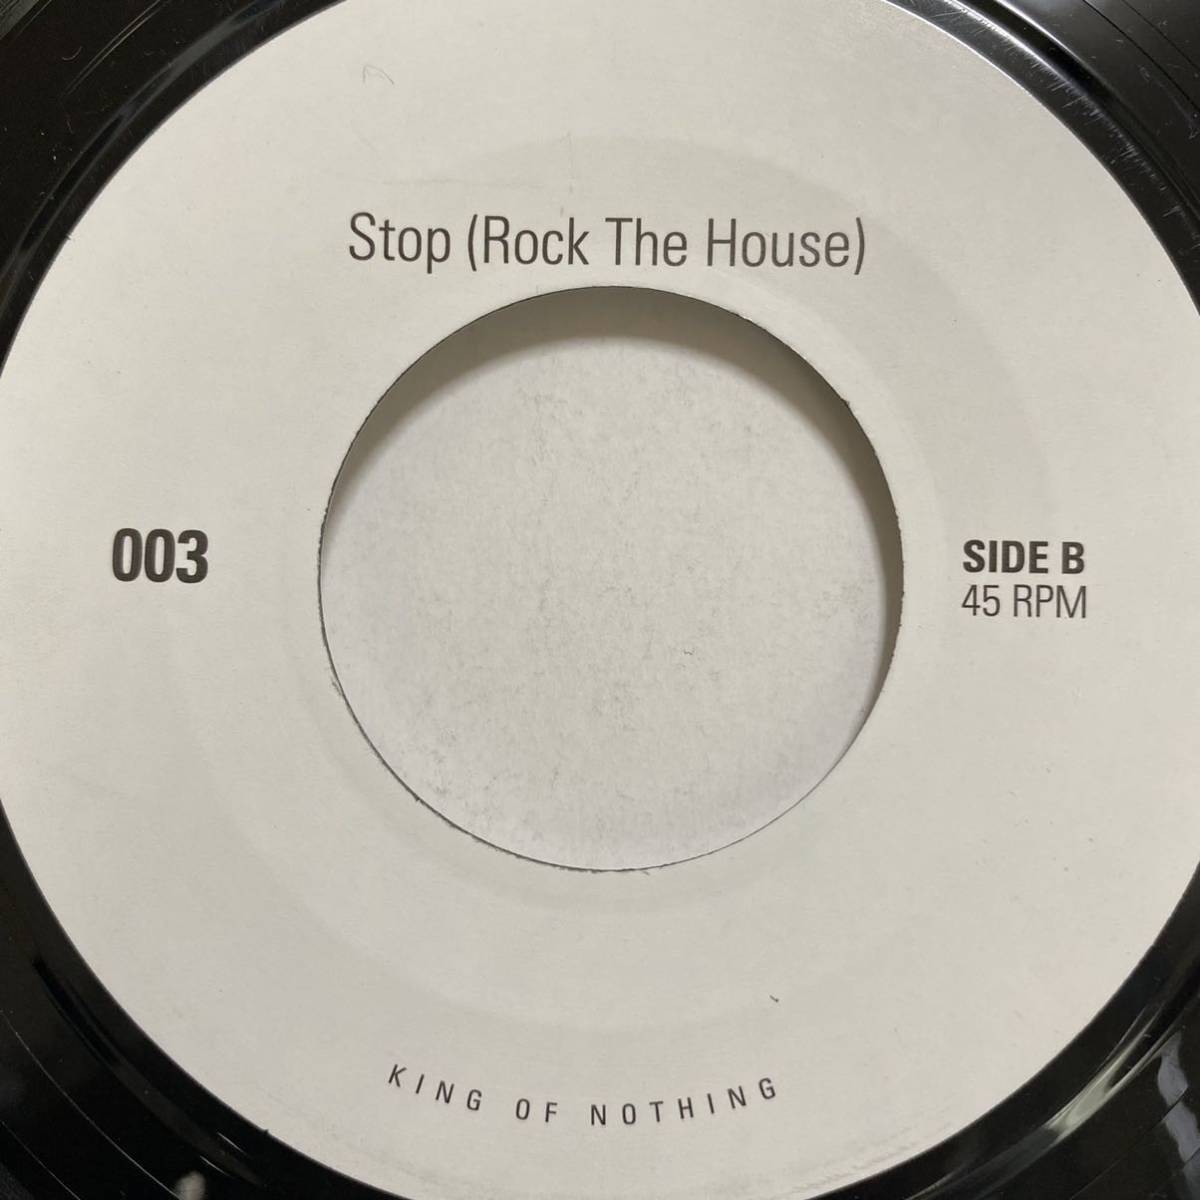 KON KING OF NOTHING MESSIN STOP STOP (ROCK THE HOUSE) 7inch 7インチ 45 EP The Gap Band Messin’ With My Mind EDIT muro kocoの画像2